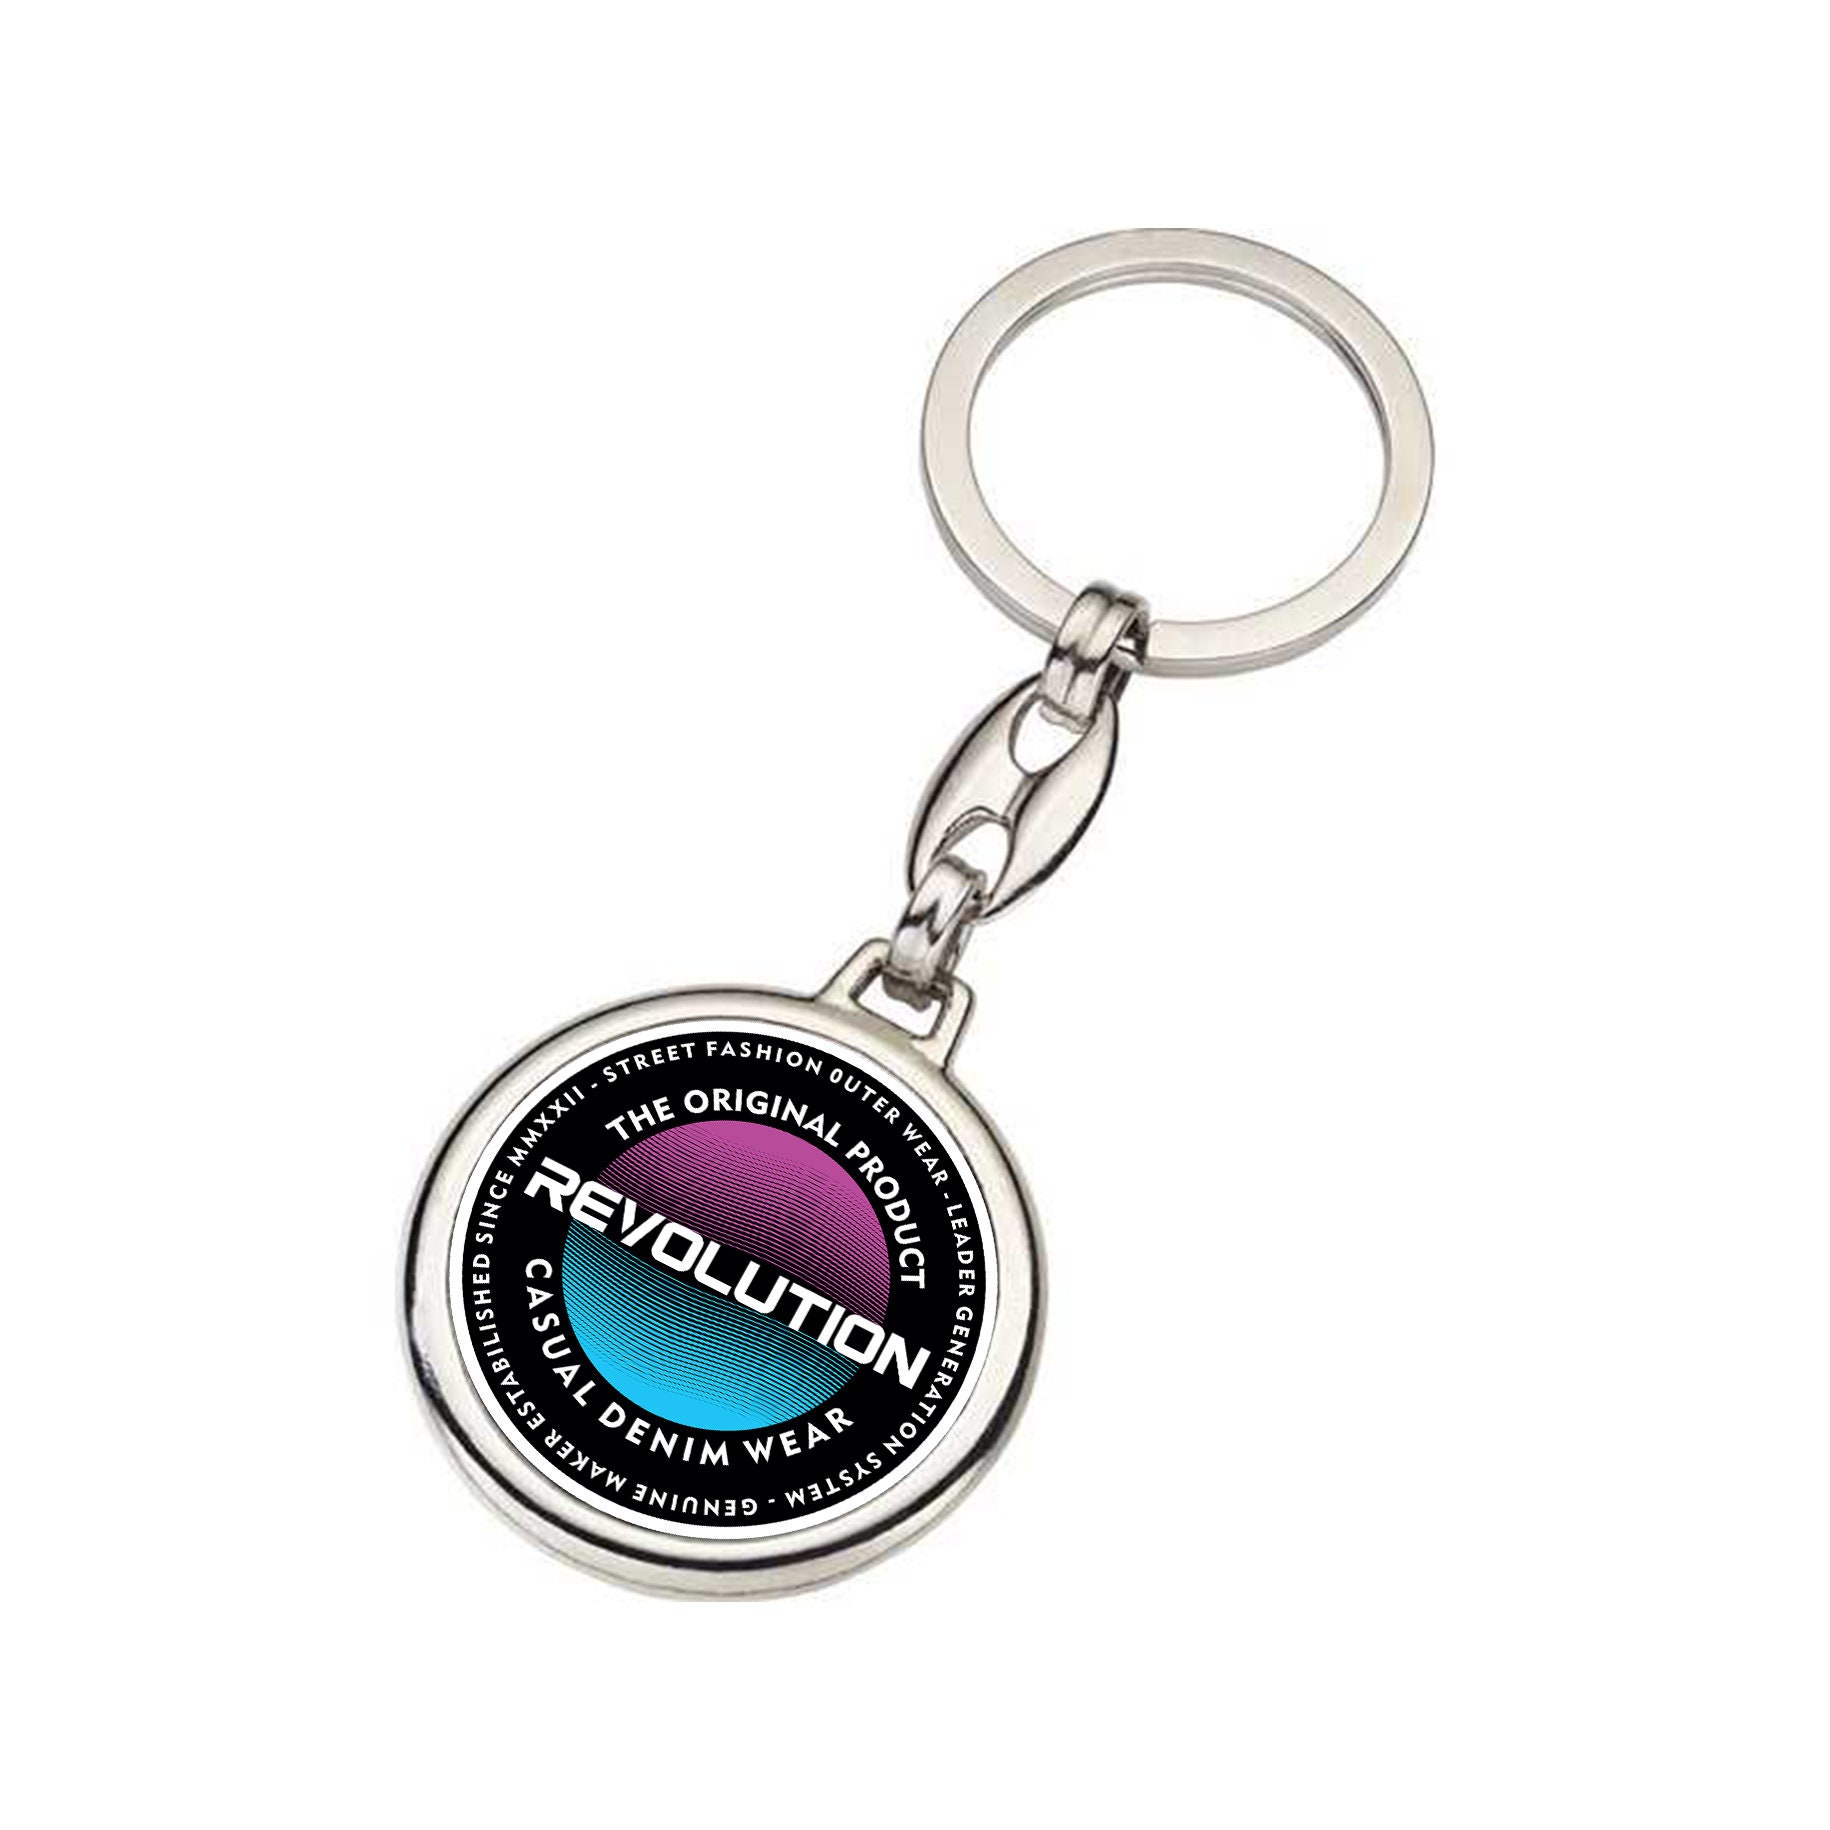 NippyCustom Custom Keychain Tags 300pcs - Wholesale Personalized Plastic Keychains for Business Giveaway Gifts